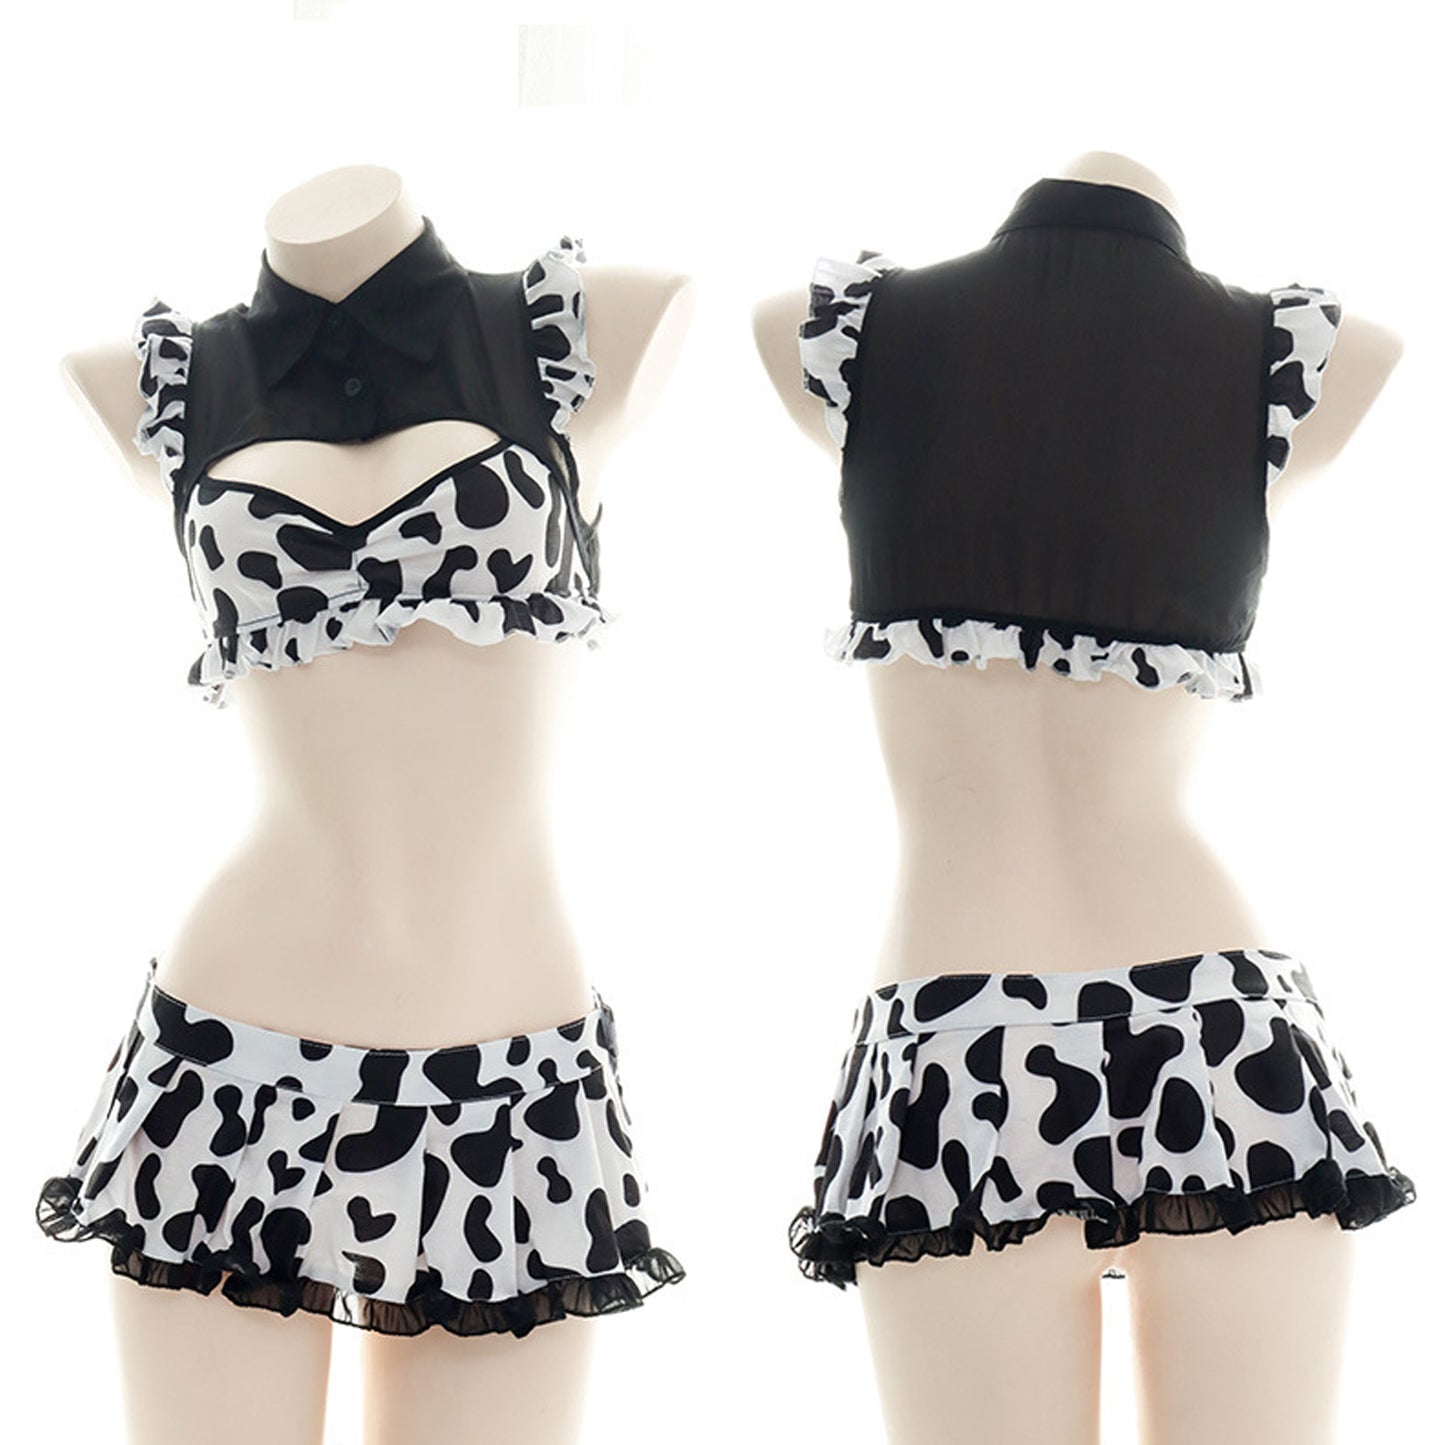 Yomorio Cute Cow Outfits 2 Piece Cow Print Lingerie Set Anime Cosplay Costumes